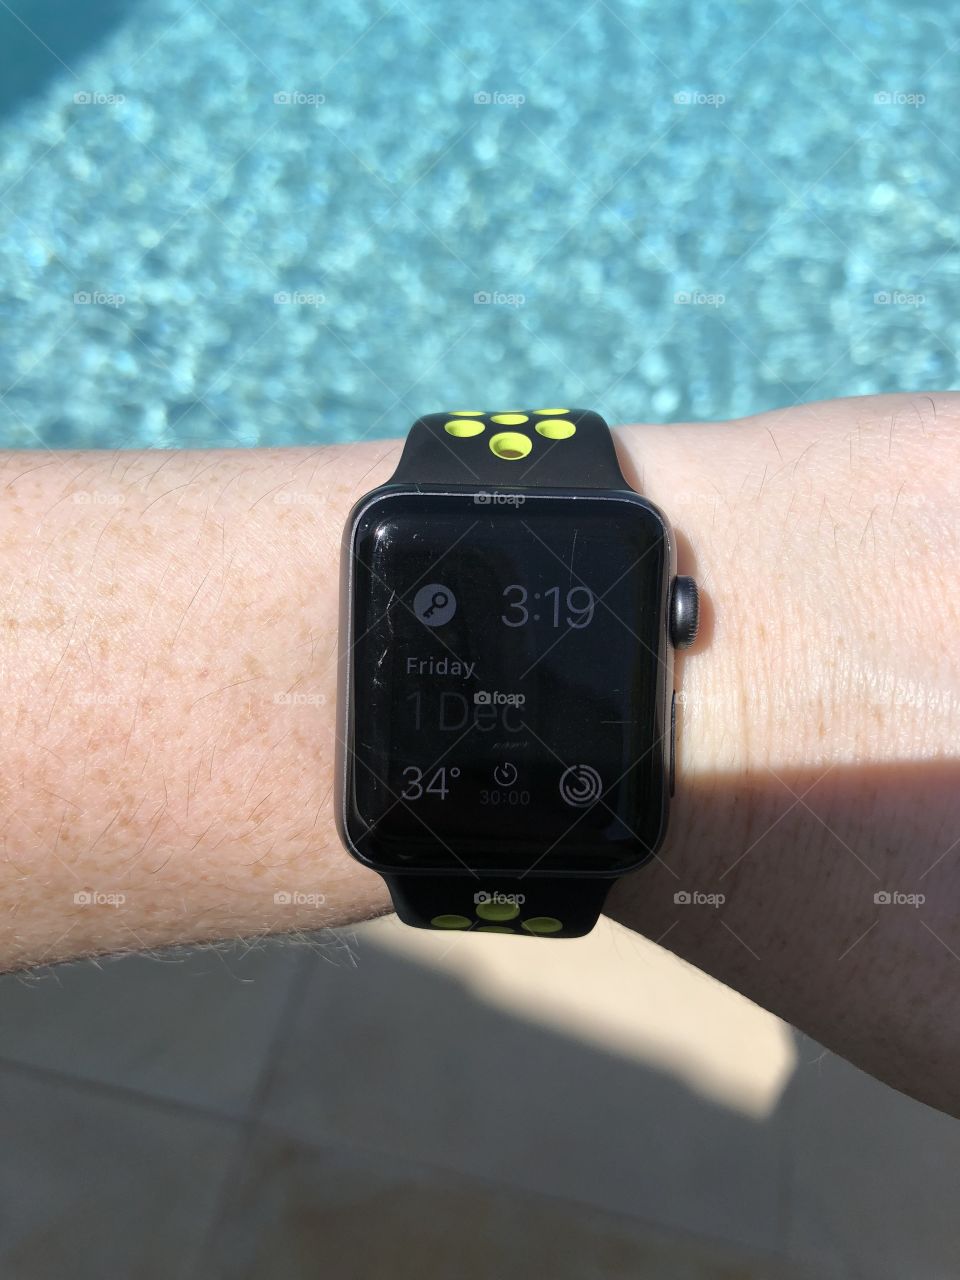 Out by the pool nike watch